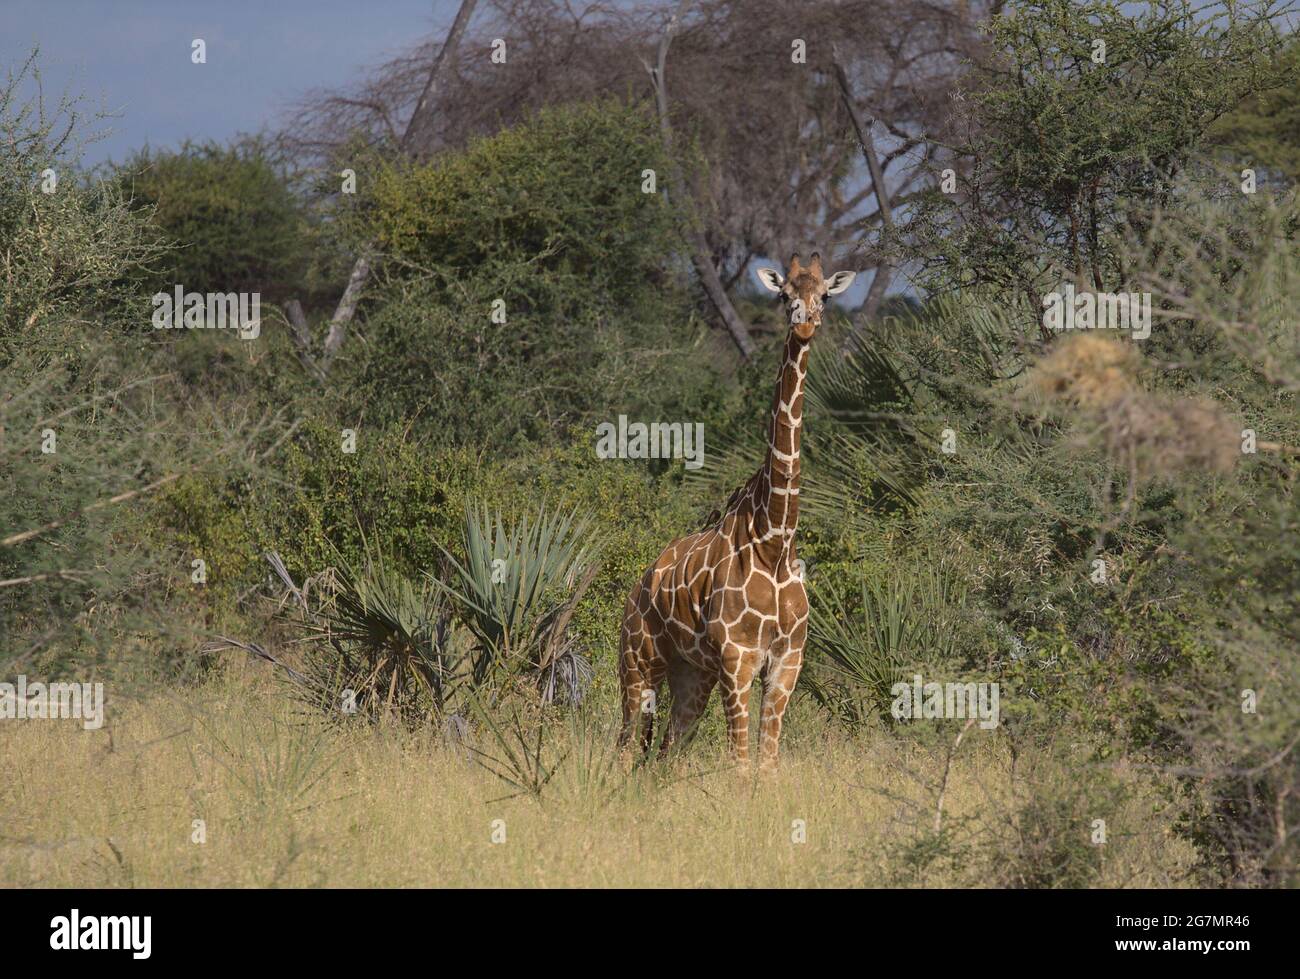 young lone reticulated giraffe standing alert and looking at camera in the wild Meru National Park, Kenya Stock Photo